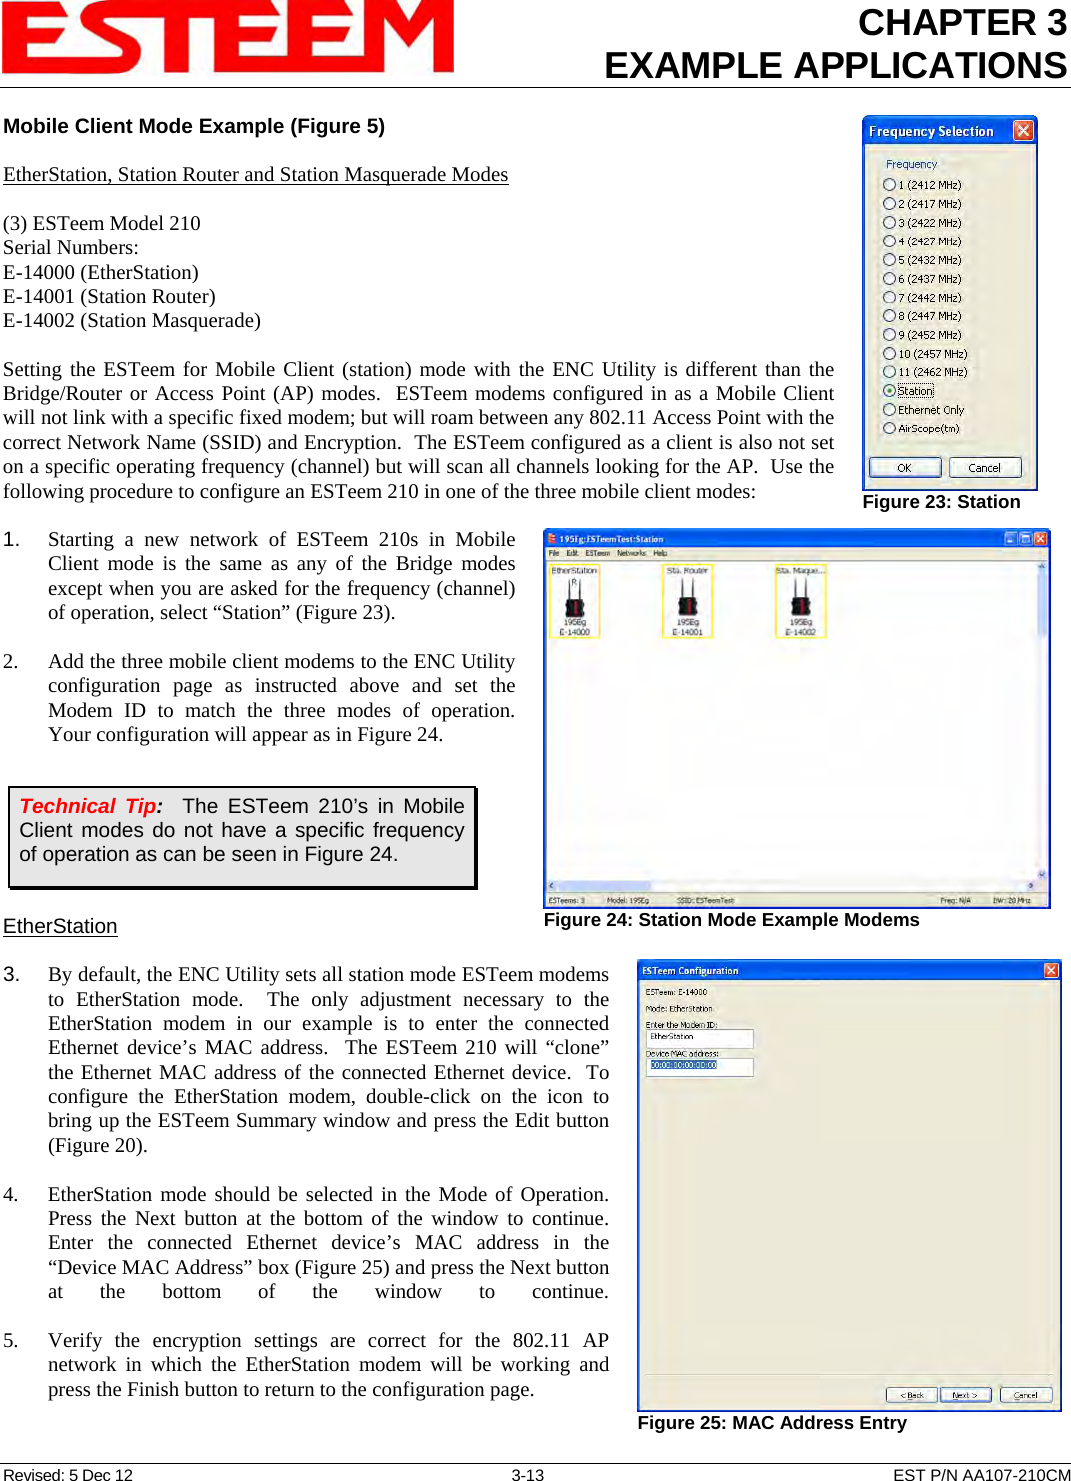 CHAPTER 3 EXAMPLE APPLICATIONS  Mobile Client Mode Example (Figure 5)  EtherStation, Station Router and Station Masquerade Modes  (3) ESTeem Model 210 Serial Numbers: E-14000 (EtherStation) E-14001 (Station Router) E-14002 (Station Masquerade)  Setting the ESTeem for Mobile Client (station) mode with the ENC Utility is different than the Bridge/Router or Access Point (AP) modes.  ESTeem modems configured in as a Mobile Client will not link with a specific fixed modem; but will roam between any 802.11 Access Point with the correct Network Name (SSID) and Encryption.  The ESTeem configured as a client is also not set on a specific operating frequency (channel) but will scan all channels looking for the AP.  Use the following procedure to configure an ESTeem 210 in one of the three mobile client modes:  1.    Starting a new network of ESTeem 210s in Mobile Client mode is the same as any of the Bridge modes except when you are asked for the frequency (channel) of operation, select “Station” (Figure 23).   2.    Add the three mobile client modems to the ENC Utility configuration page as instructed above and set the Modem ID to match the three modes of operation.  Your configuration will appear as in Figure 24.   EtherStation  3.    By default, the ENC Utility sets all station mode ESTeem modems to EtherStation mode.  The only adjustment necessary to the EtherStation modem in our example is to enter the connected Ethernet device’s MAC address.  The ESTeem 210 will “clone” the Ethernet MAC address of the connected Ethernet device.  To configure the EtherStation modem, double-click on the icon to bring up the ESTeem Summary window and press the Edit button (Figure 20).   4.    EtherStation mode should be selected in the Mode of Operation.  Press the Next button at the bottom of the window to continue.  Enter the connected Ethernet device’s MAC address in the “Device MAC Address” box (Figure 25) and press the Next button at the bottom of the window to continue.  5.    Verify the encryption settings are correct for the 802.11 AP network in which the EtherStation modem will be working and press the Finish button to return to the configuration page.  Figure 23: Station   Figure 24: Station Mode Example Modems  Technical Tip:  The ESTeem 210’s in Mobile Client modes do not have a specific frequency of operation as can be seen in Figure 24.  Figure 25: MAC Address Entry  Revised: 5 Dec 12  3-13  EST P/N AA107-210CM 